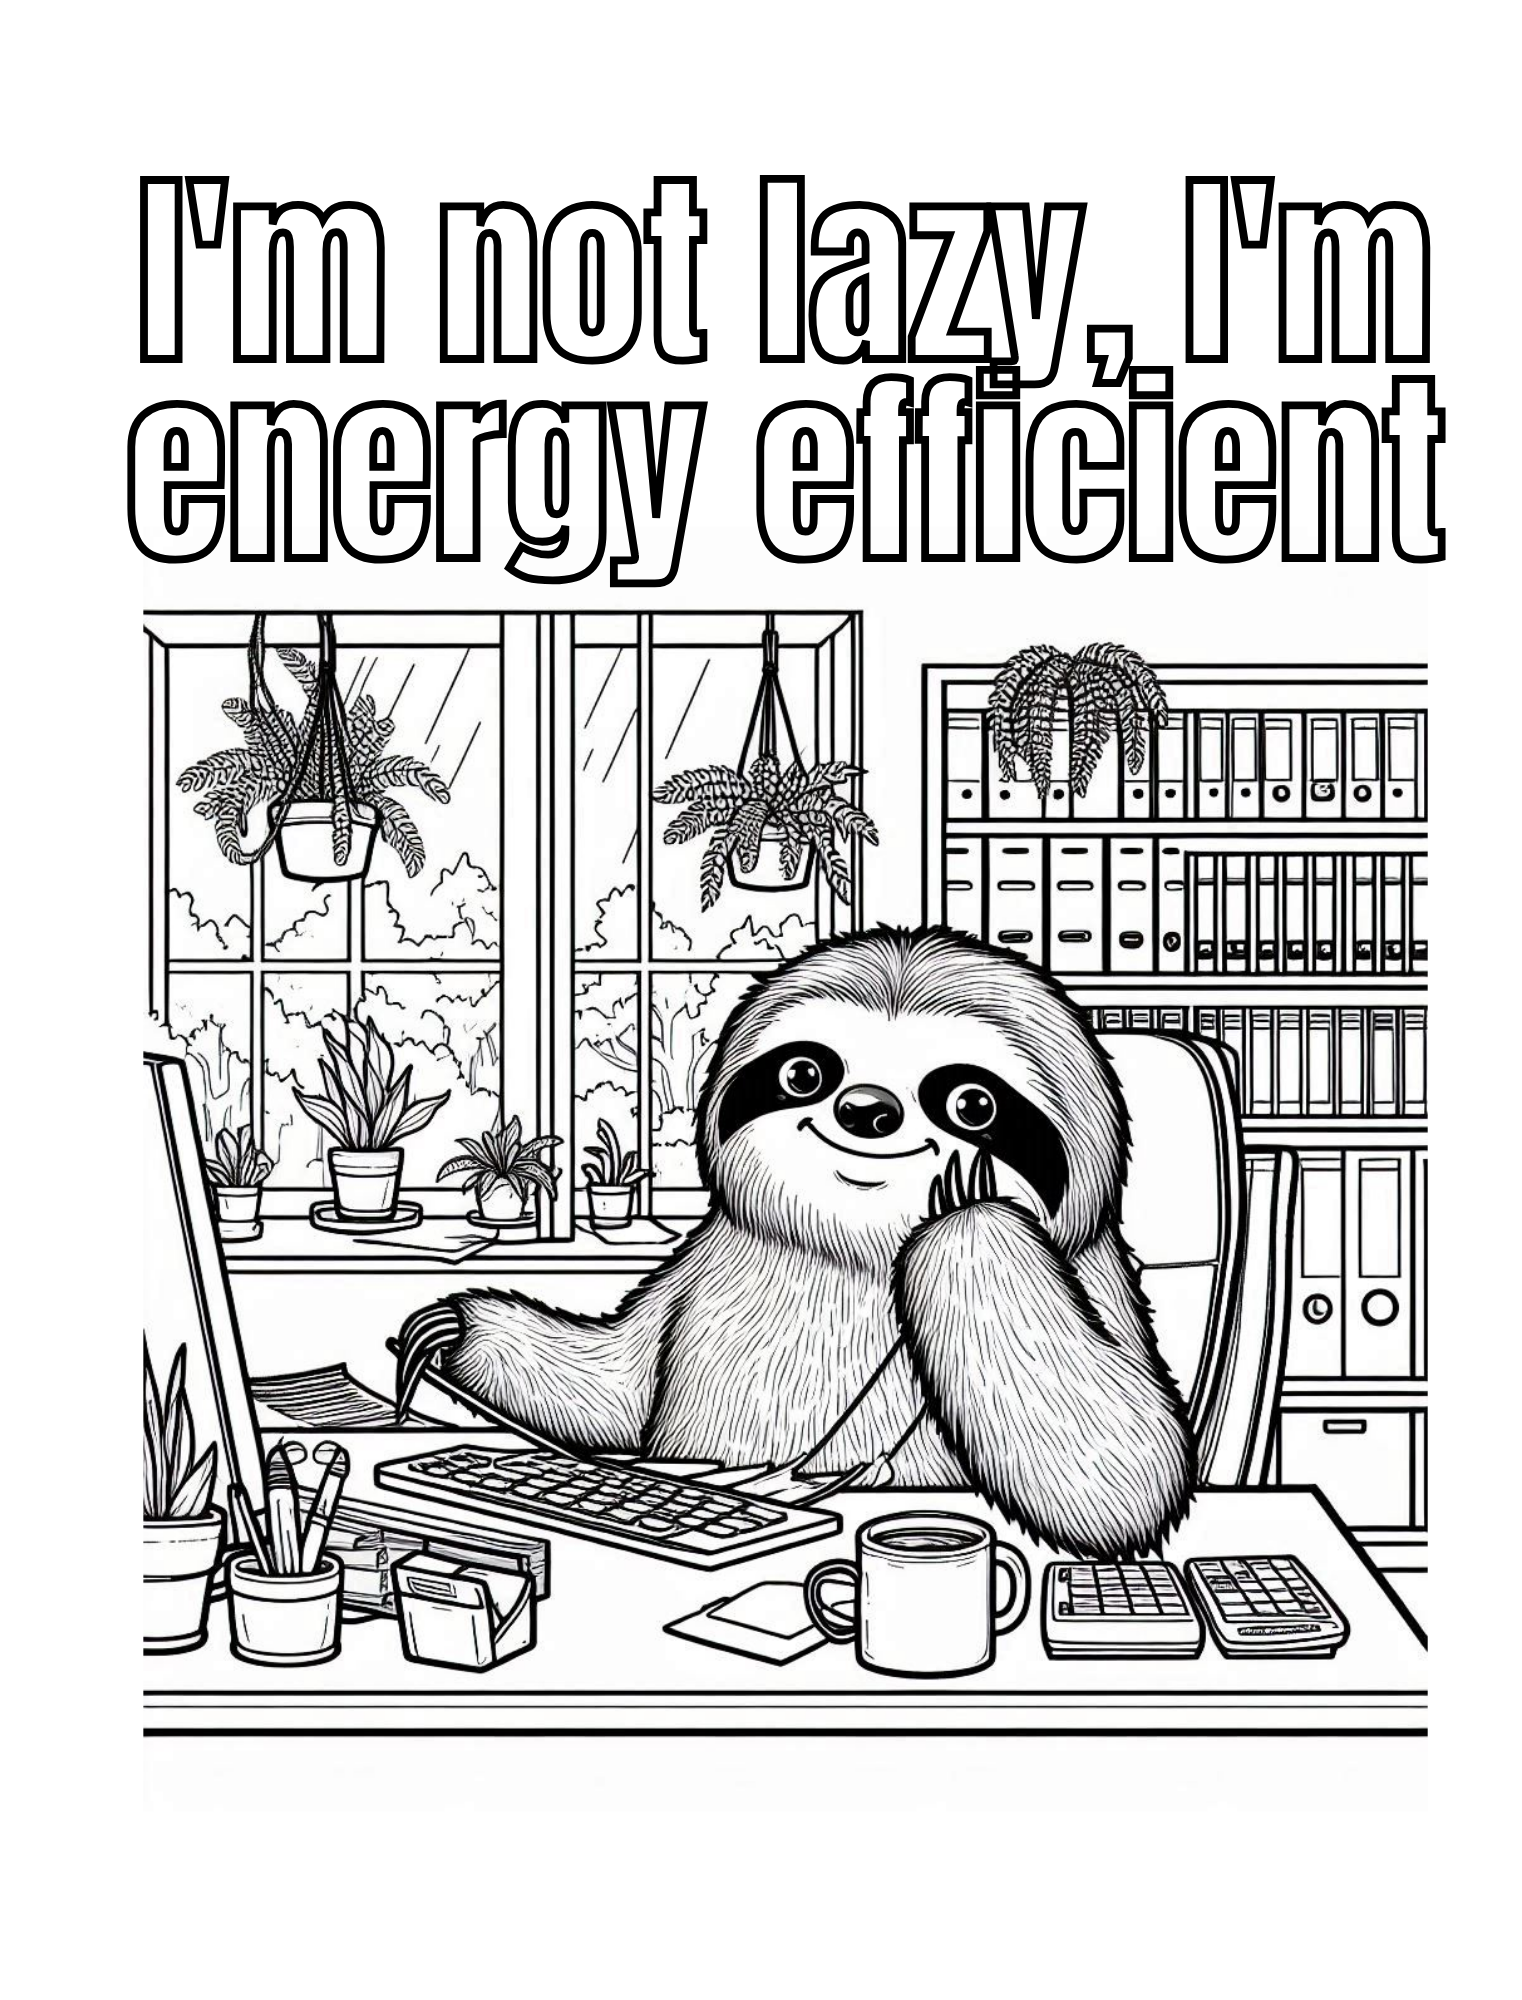 Funny Sloth Quotes on Coloring Pages